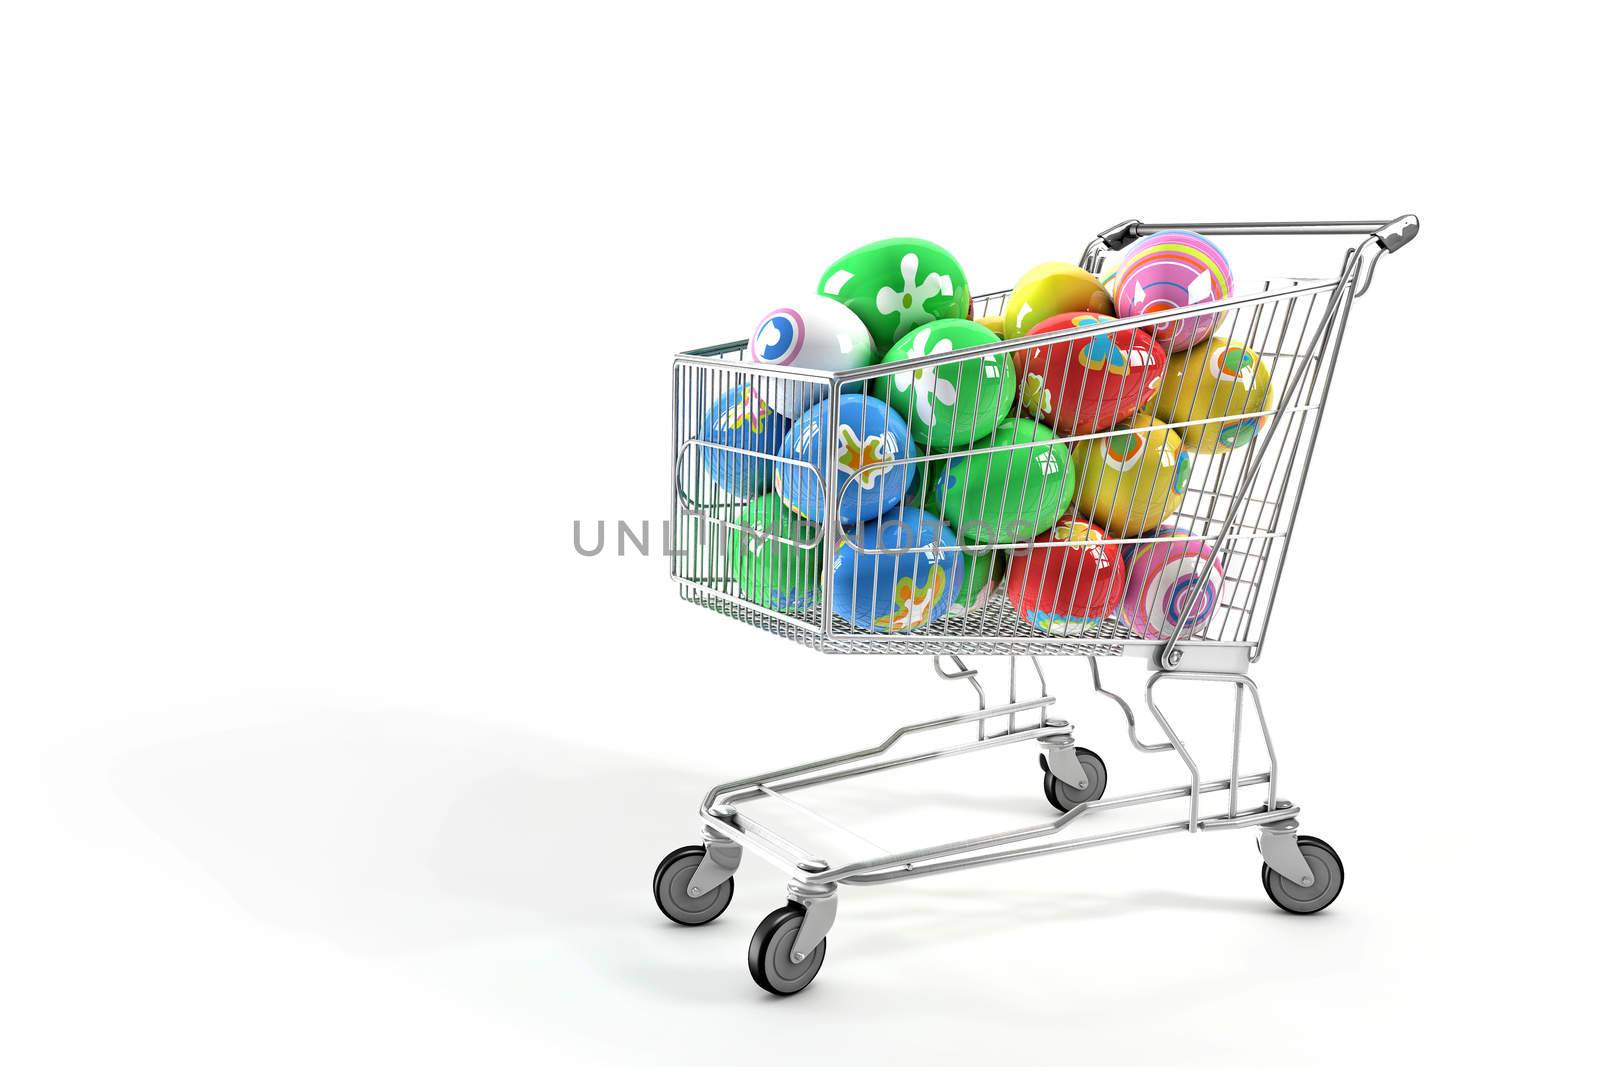 Shopping cart and Easter eggs by dynamicfoto